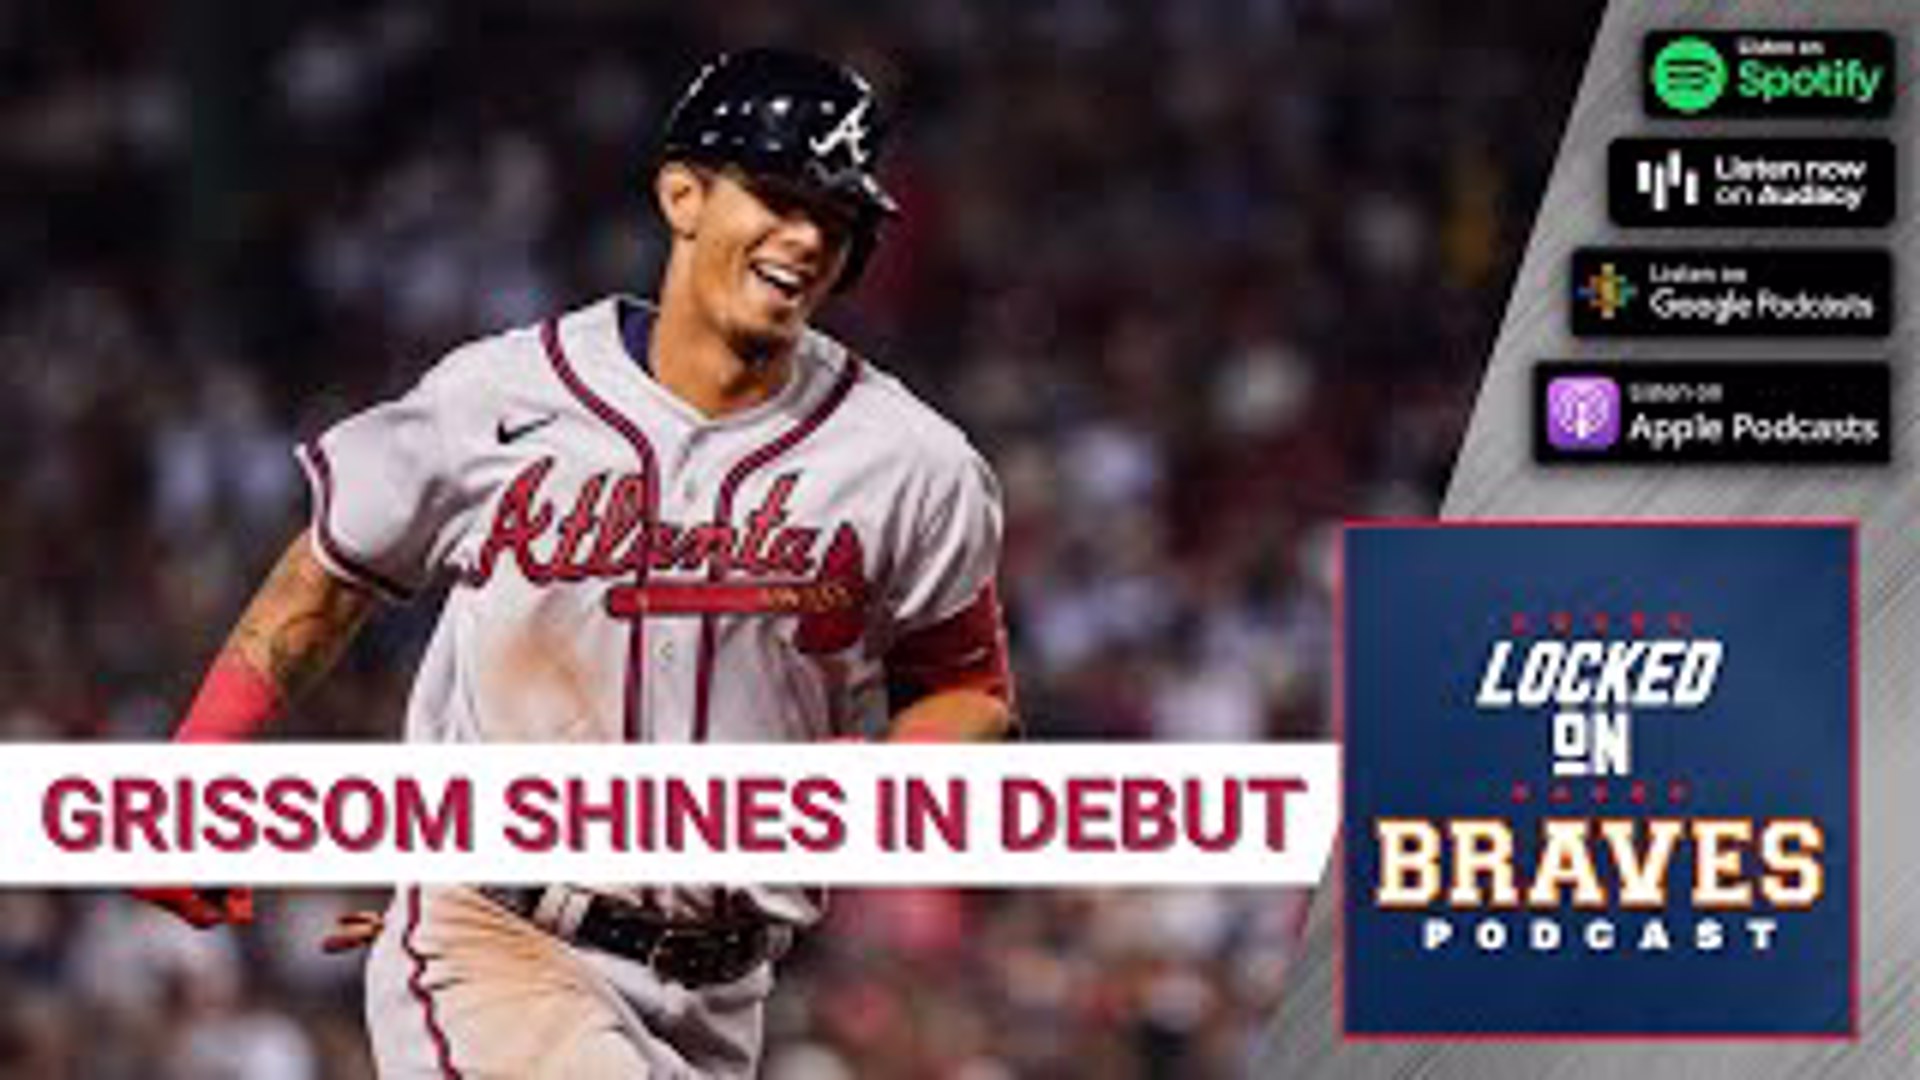 Prospect Grissom homers in debut, Braves beat Red Sox 8-4